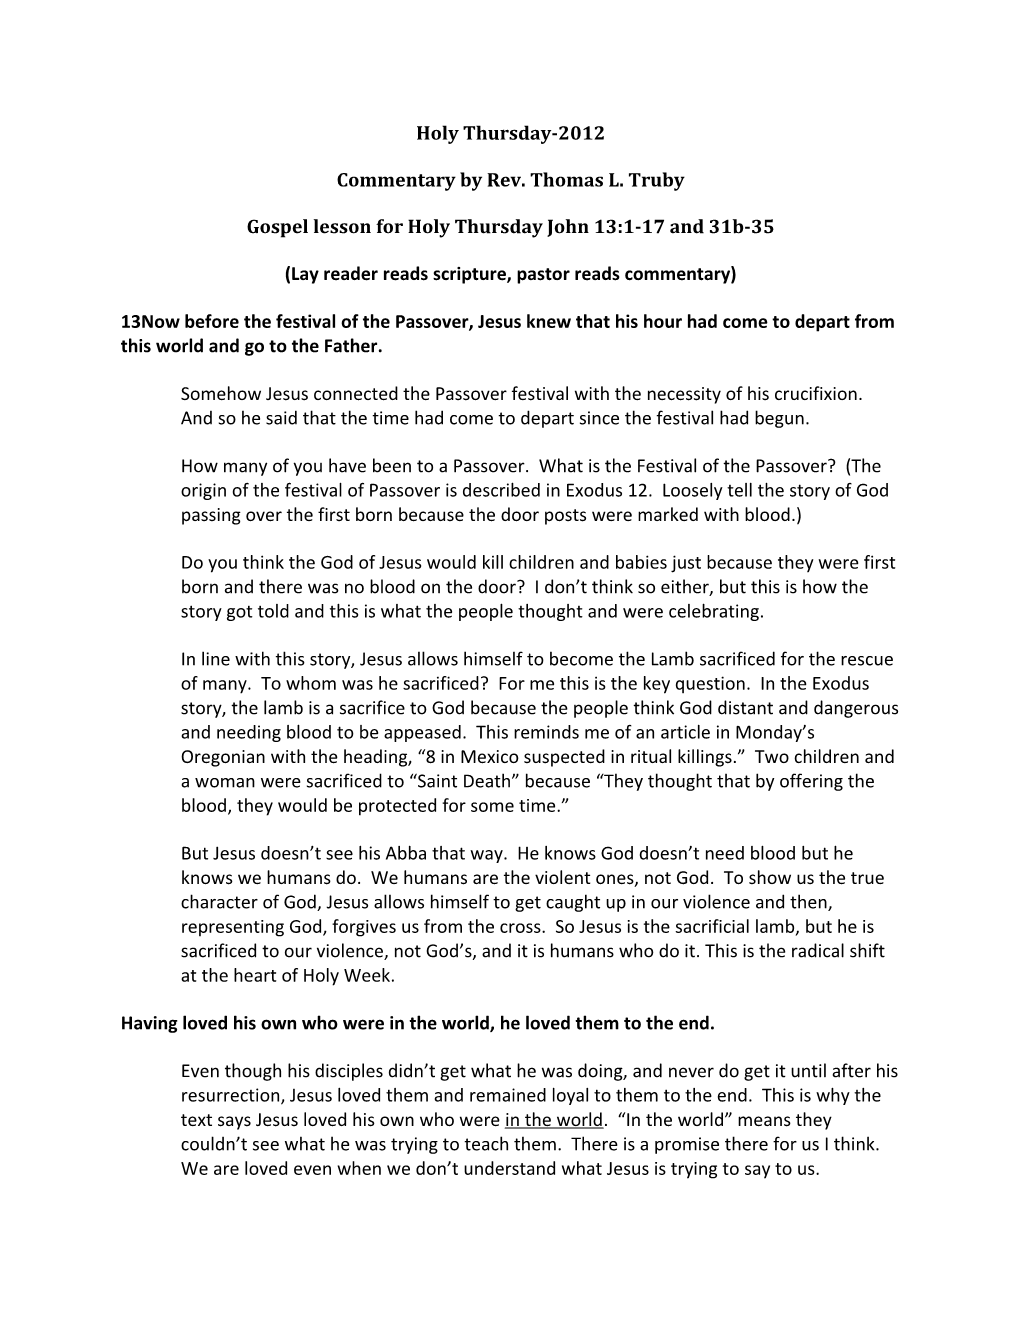 Commentary by Rev. Thomas L. Truby